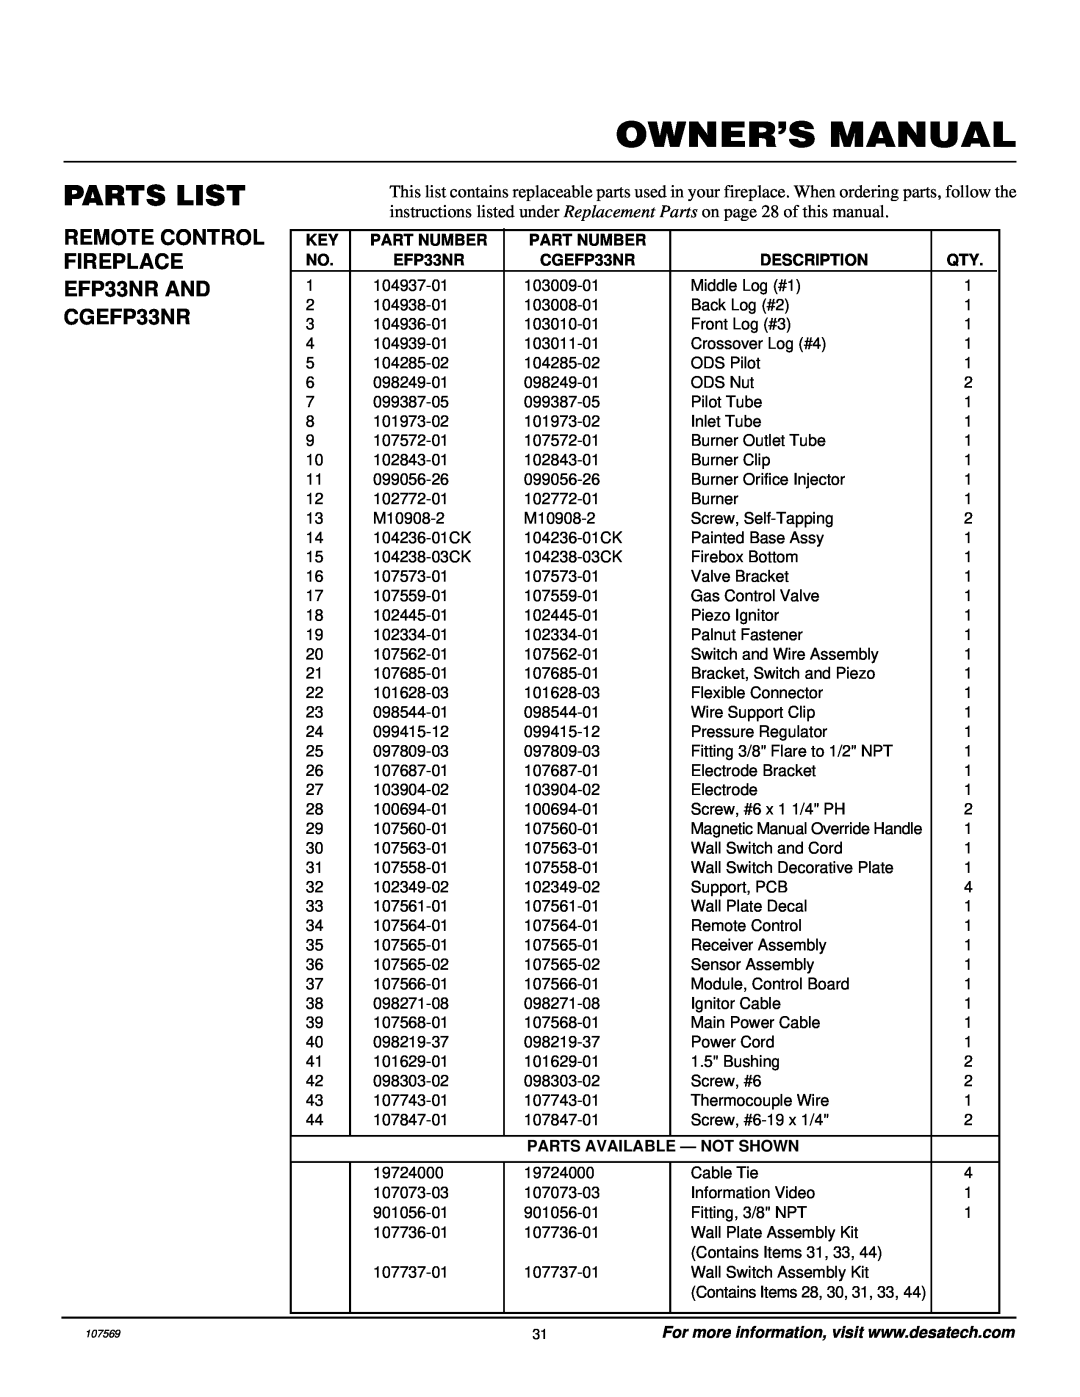 Desa installation manual Parts List, REMOTE CONTROL FIREPLACE EFP33NR AND CGEFP33NR 